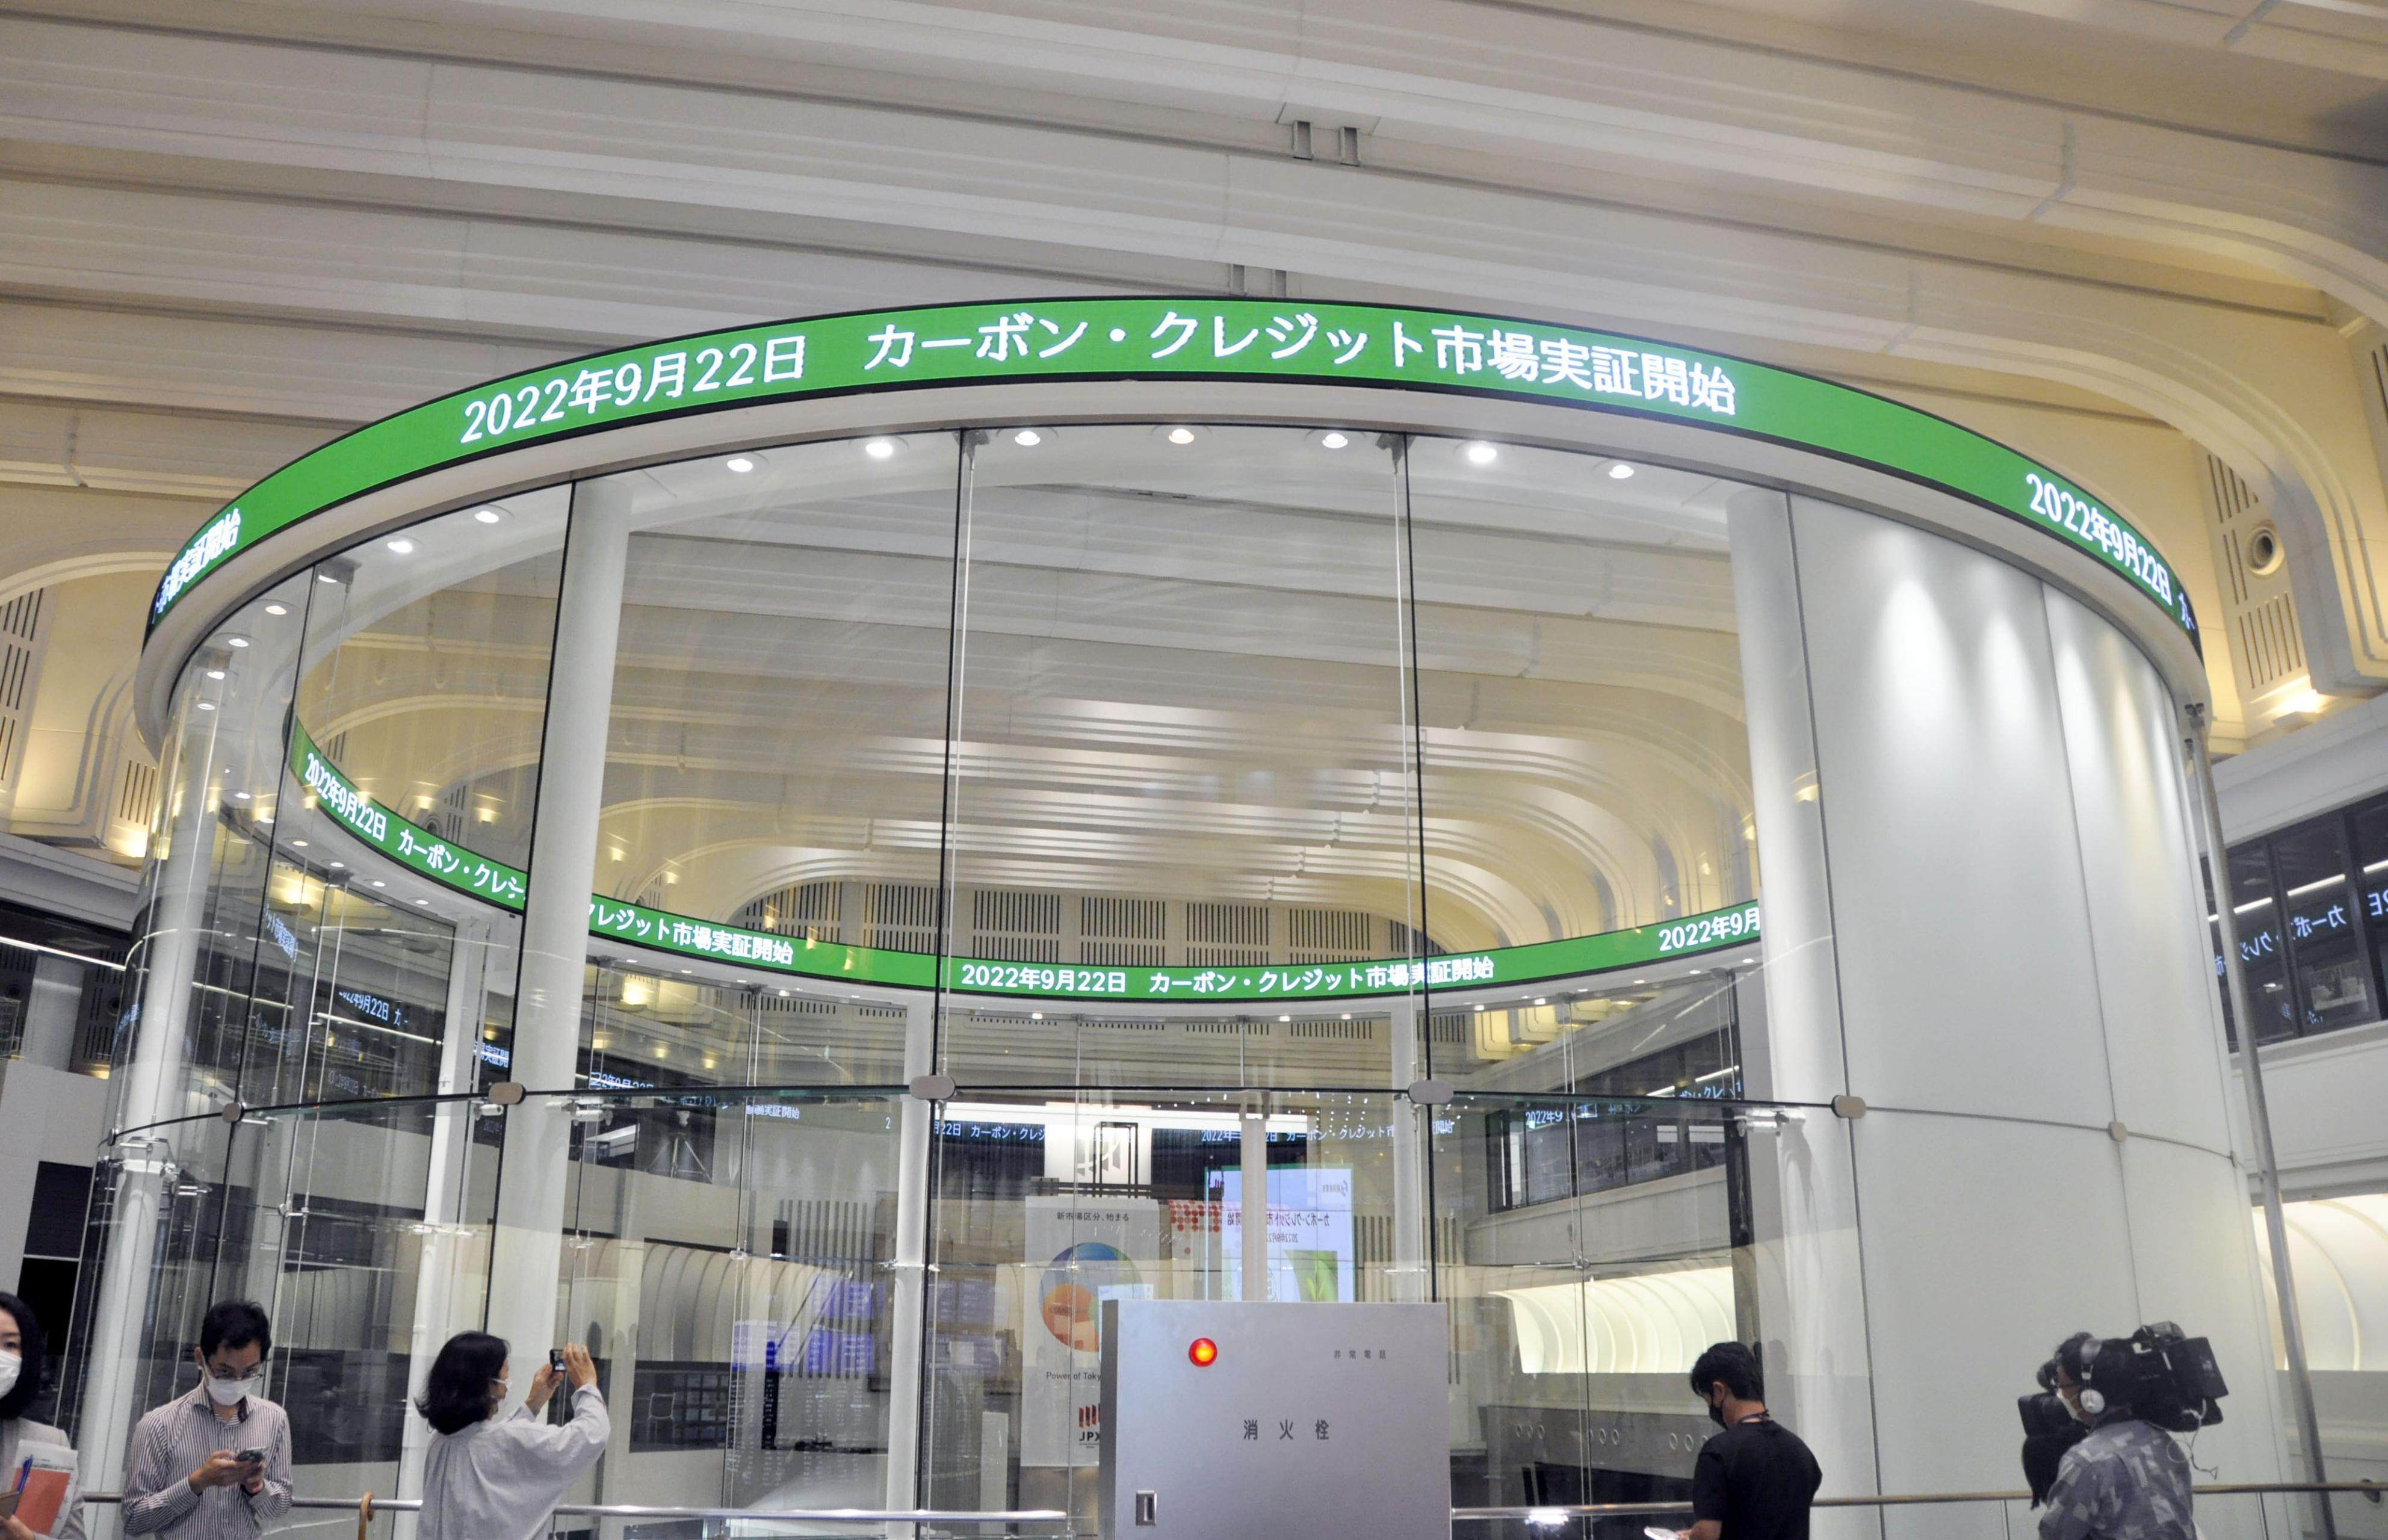 The Market Centre inside the Tokyo Stock Exchange on September 22, the day Japan’s Ministry of Economy, Trade and Industry launched the country’s first carbon trading scheme on a trial basis. Photo: Kyodo